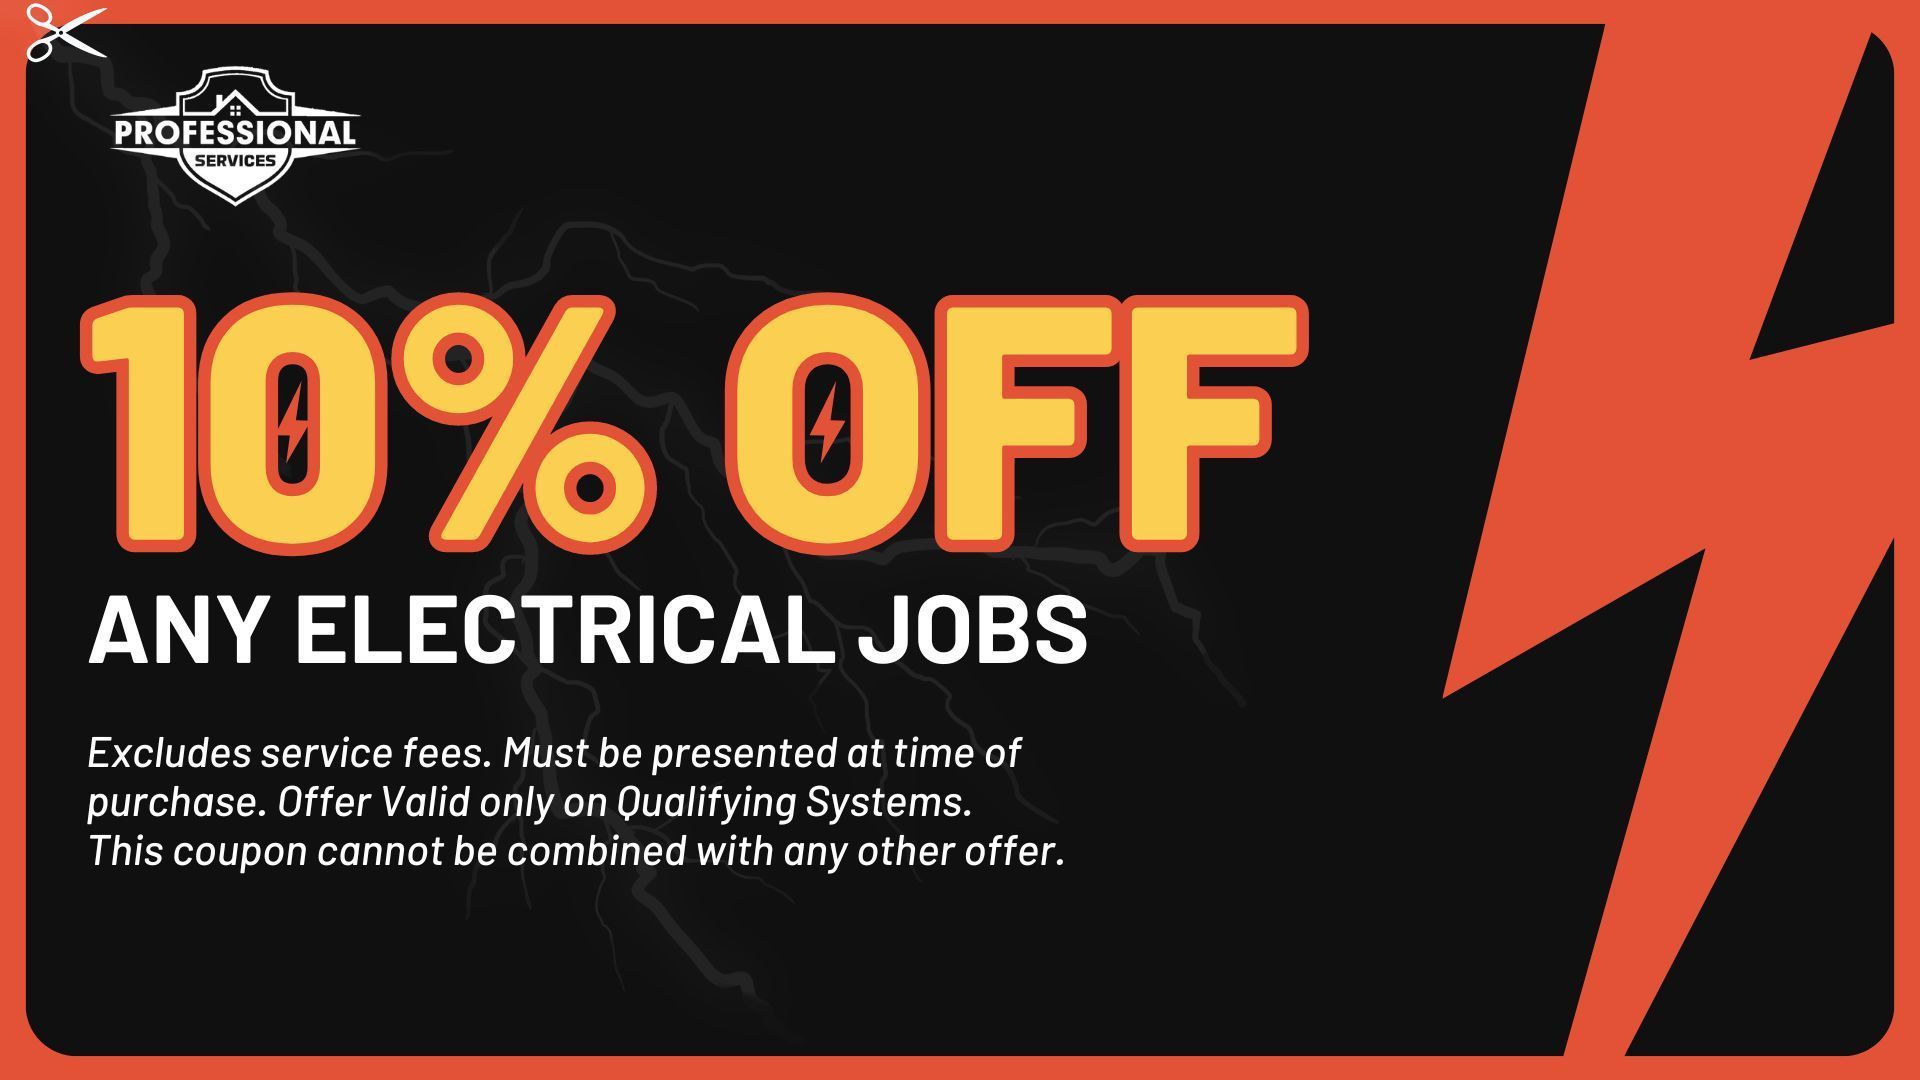 10% OFF Any Electrical Jobs